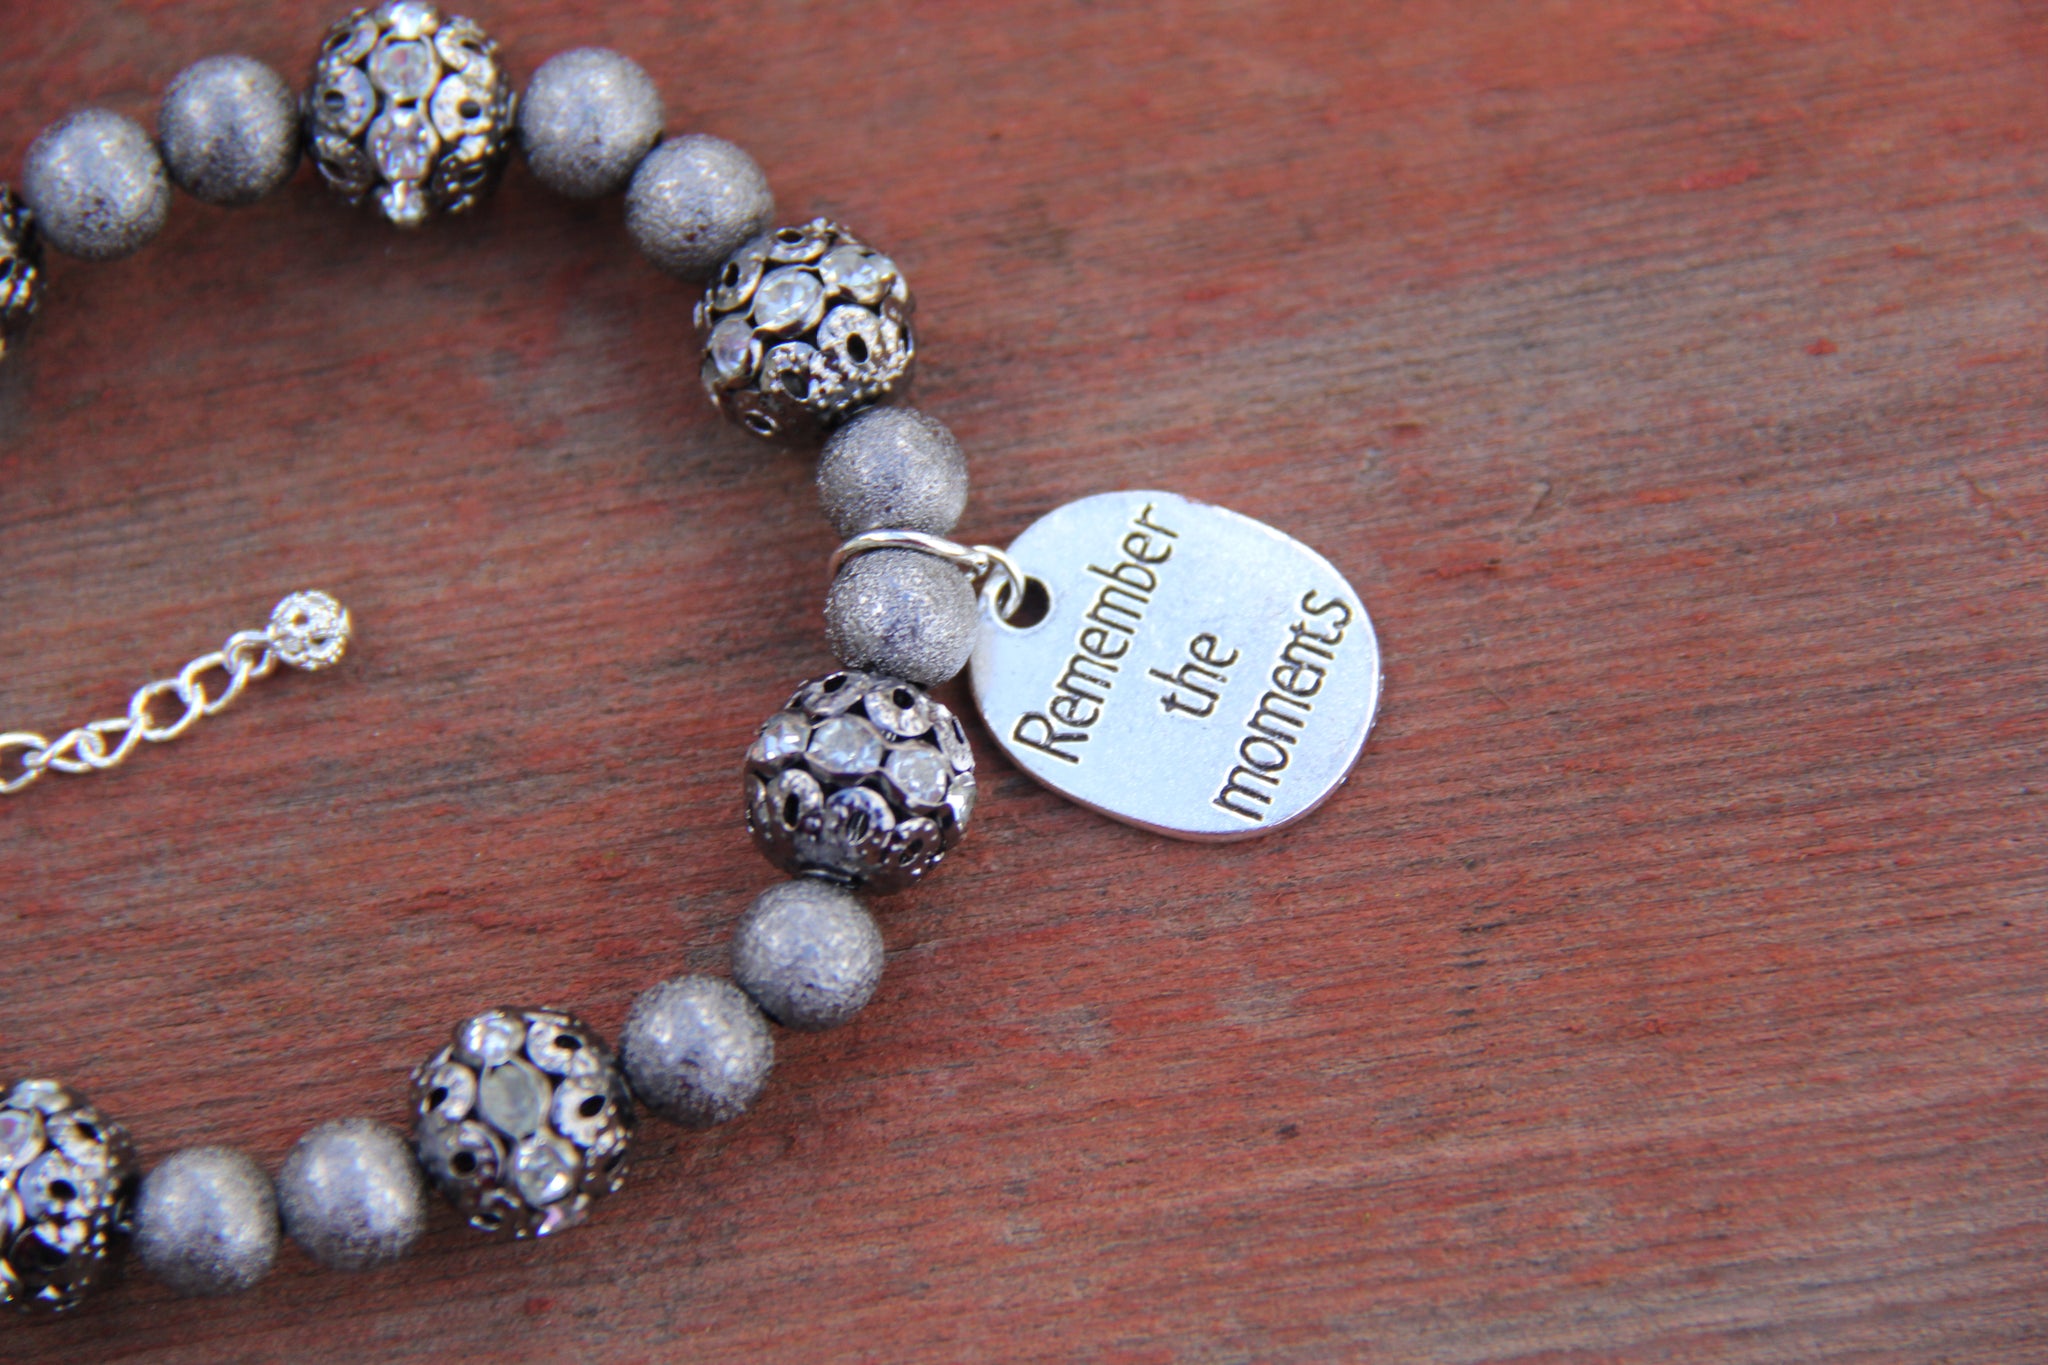 Grey colored lite weight beads with "Remember the moments" silver charm